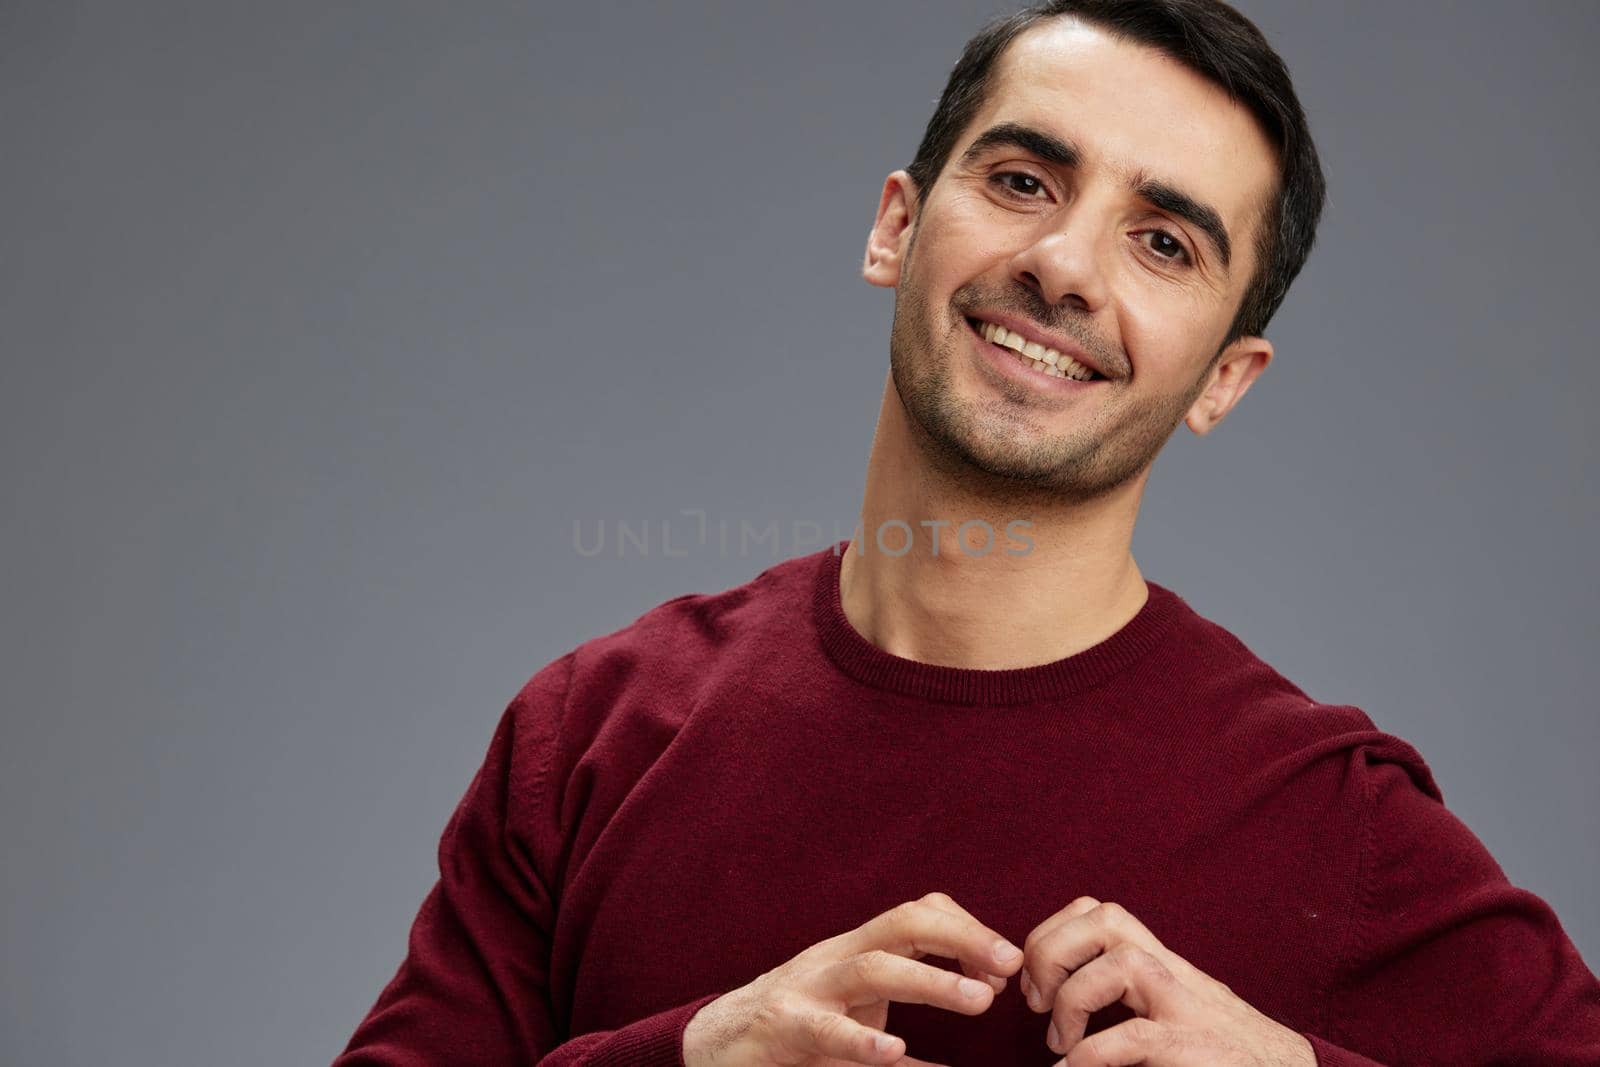 portrait of a smiling man in a red sweater gesturing with hands posing Gray background by SHOTPRIME